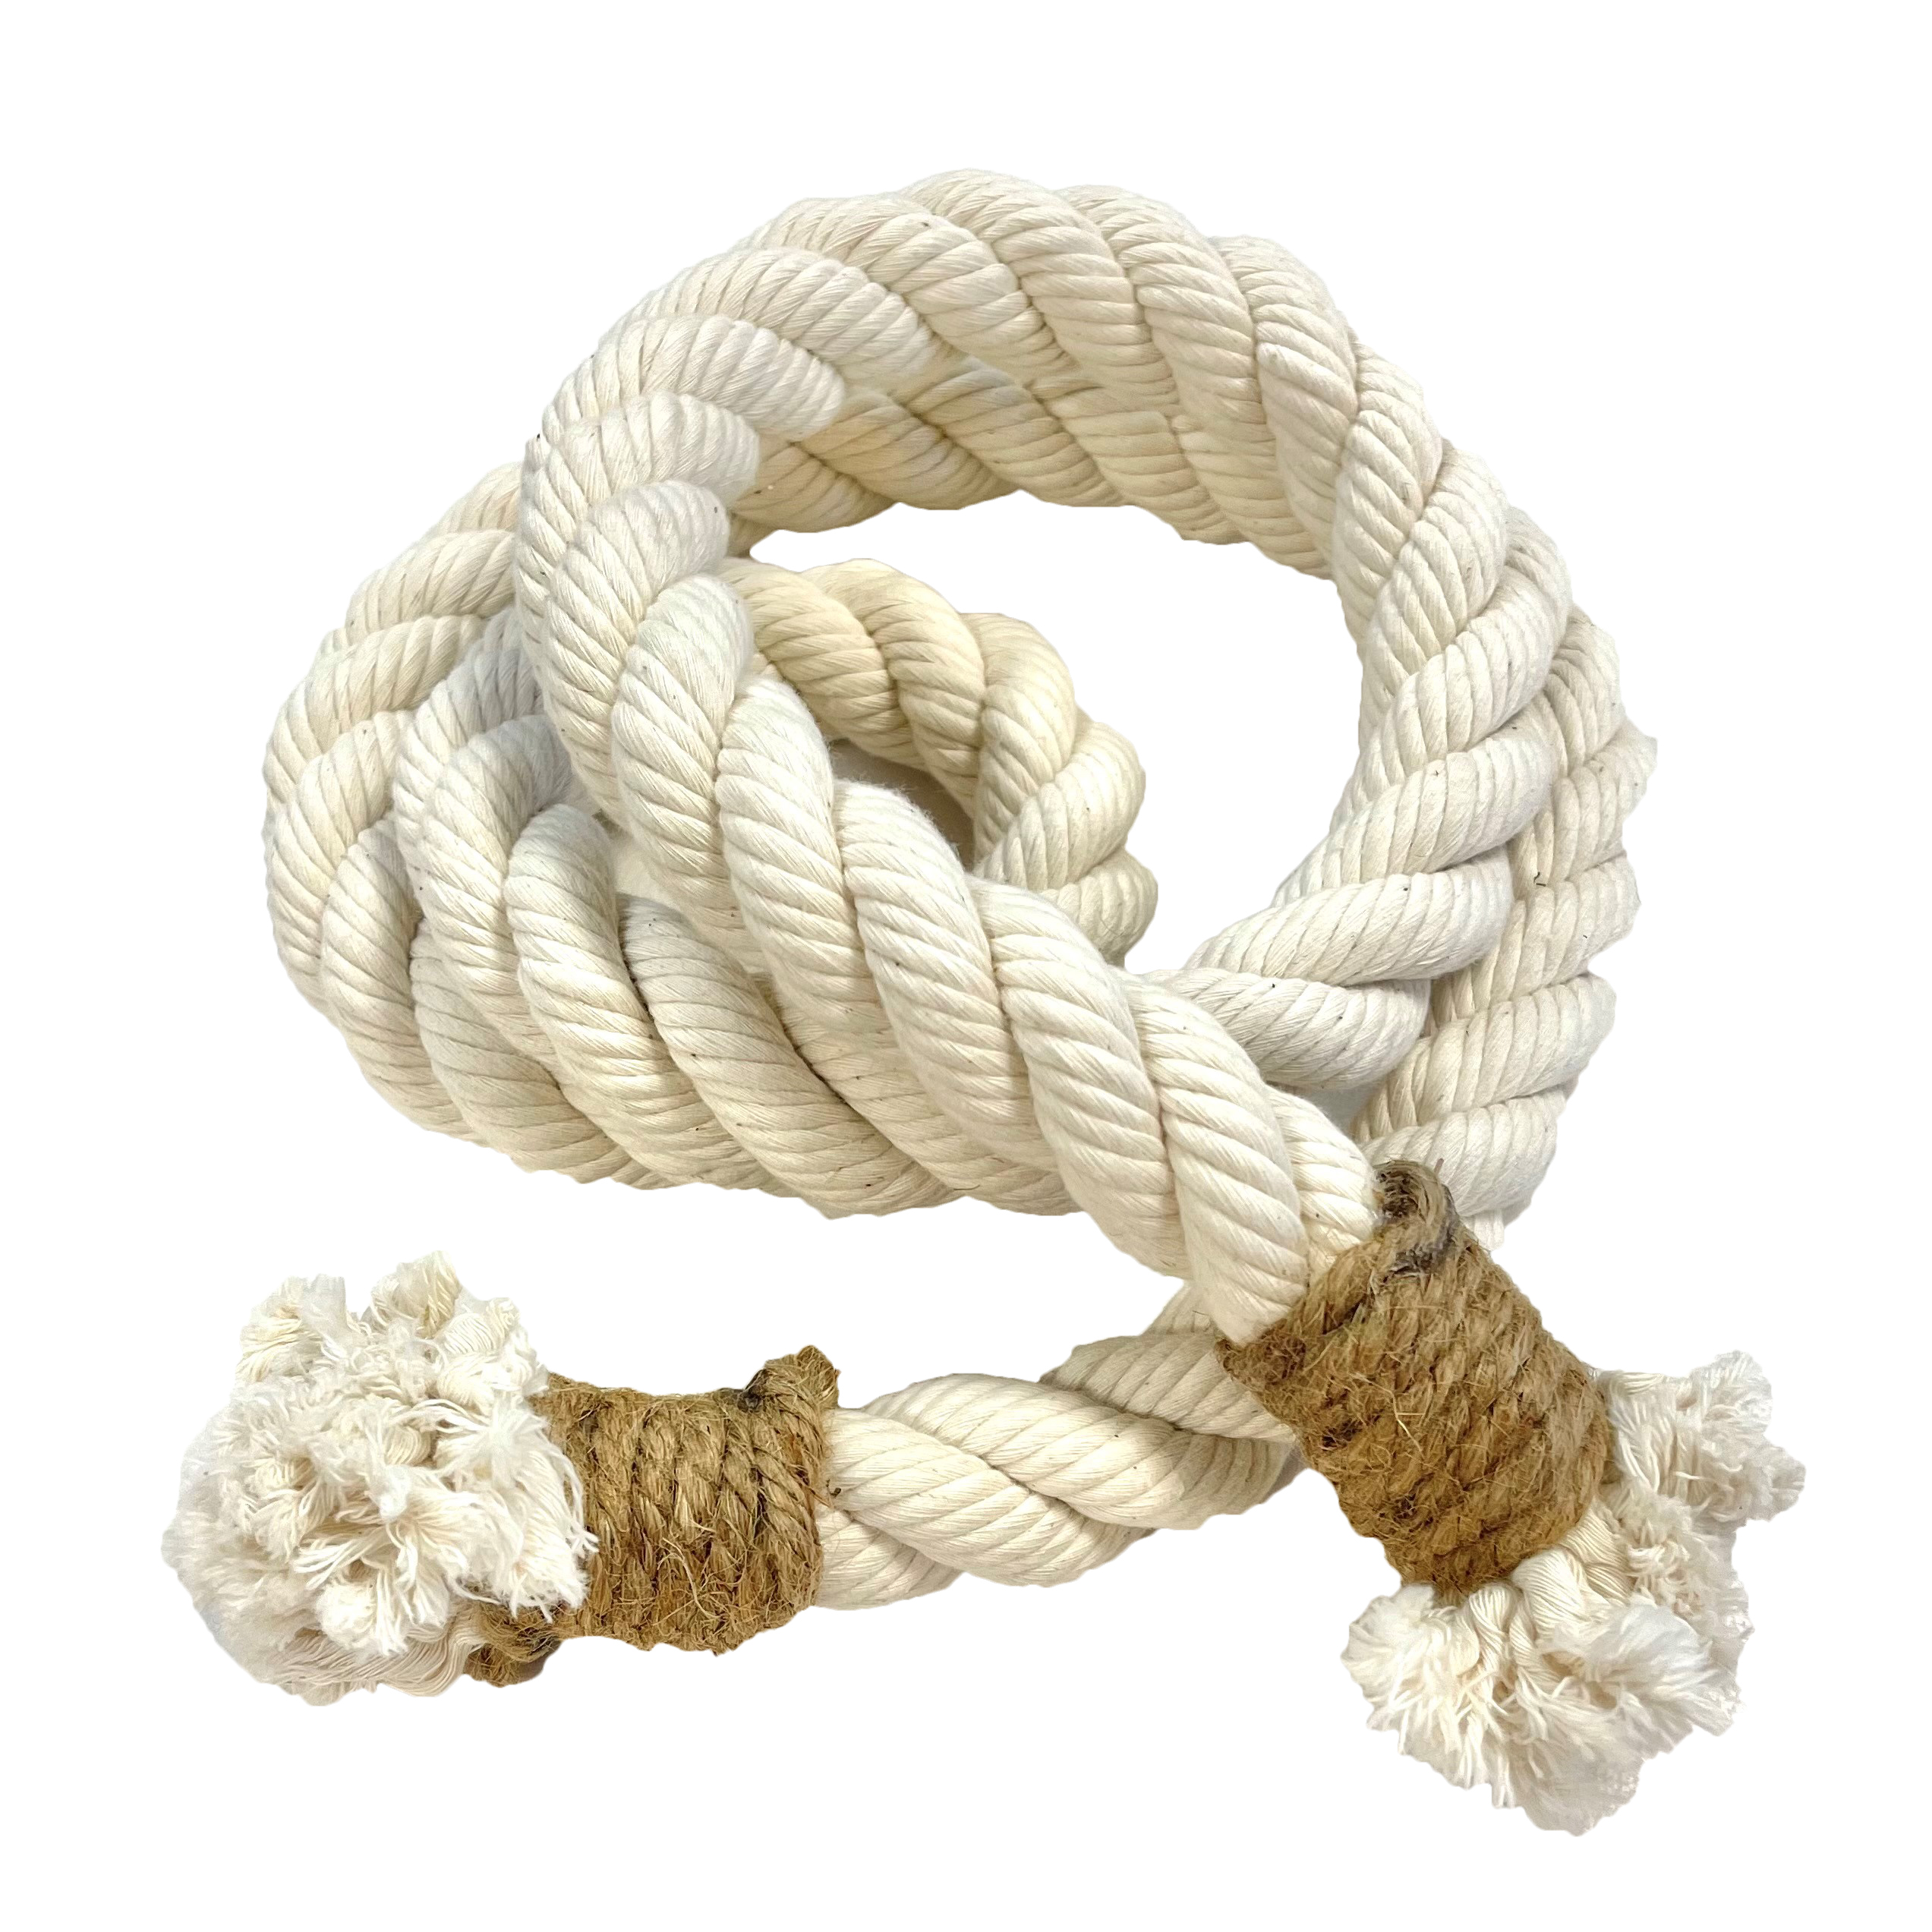 https://apresparty.com/assets/product-images/raw/white%20nautical%20rope.jpg